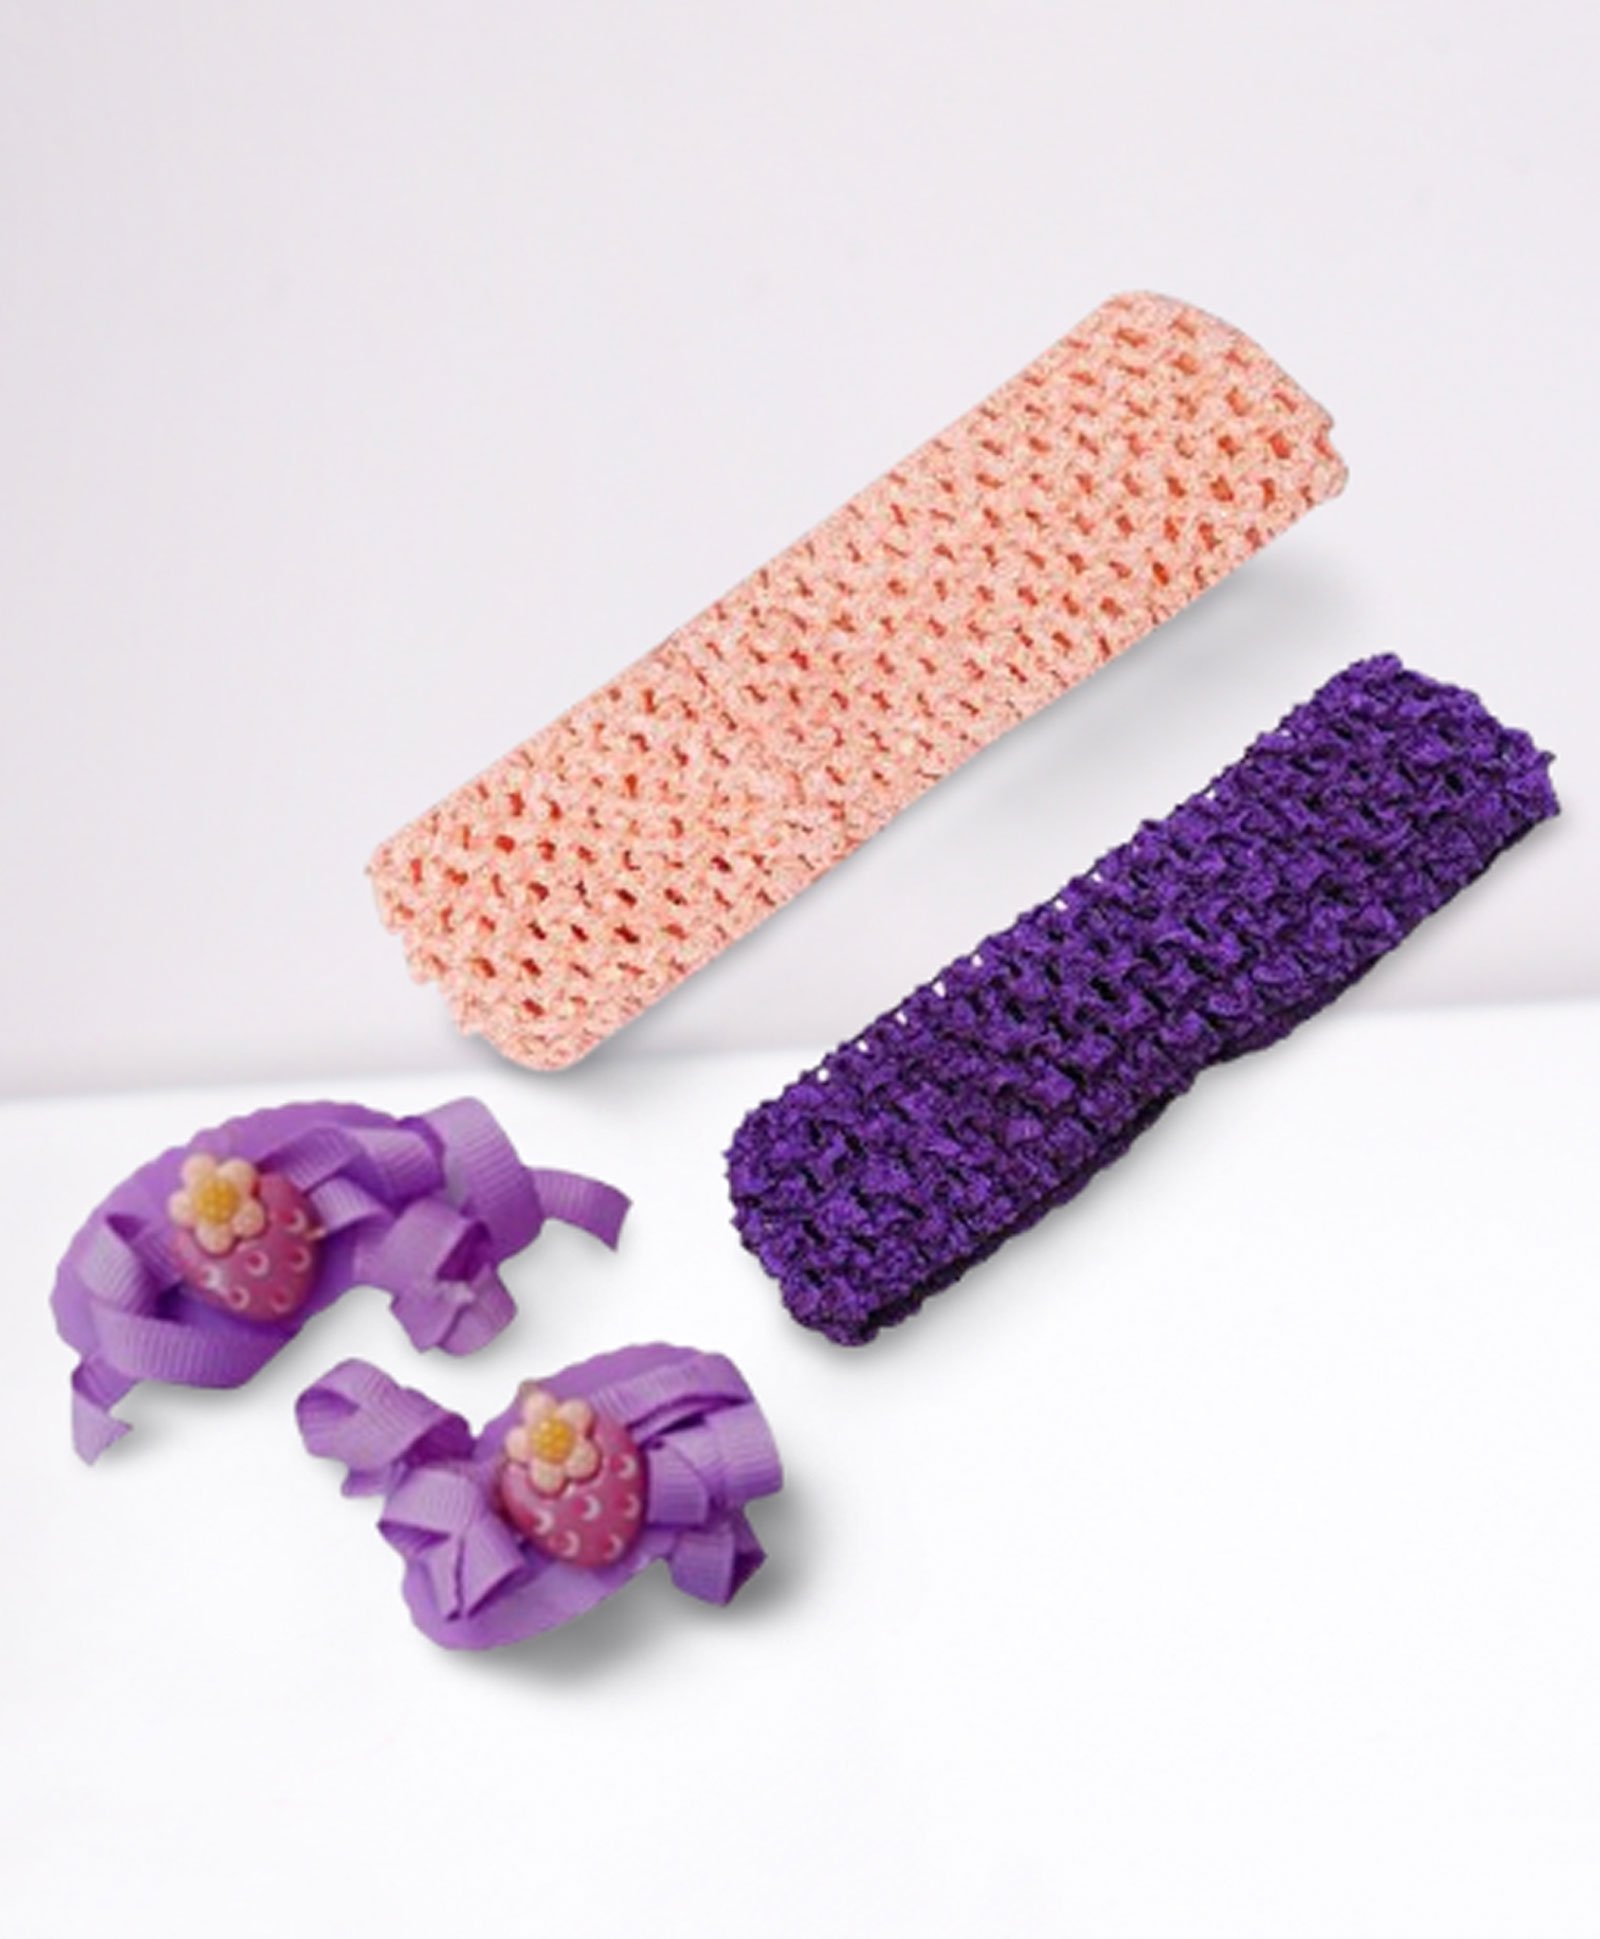 Akinos Kids Crochet Knitted Soft Elastic Headband With Matching Korker Fancy  Hair Clips Set - Peach And Purple for Girls (1-5 Years) Online in India,  Buy at  - 12687153